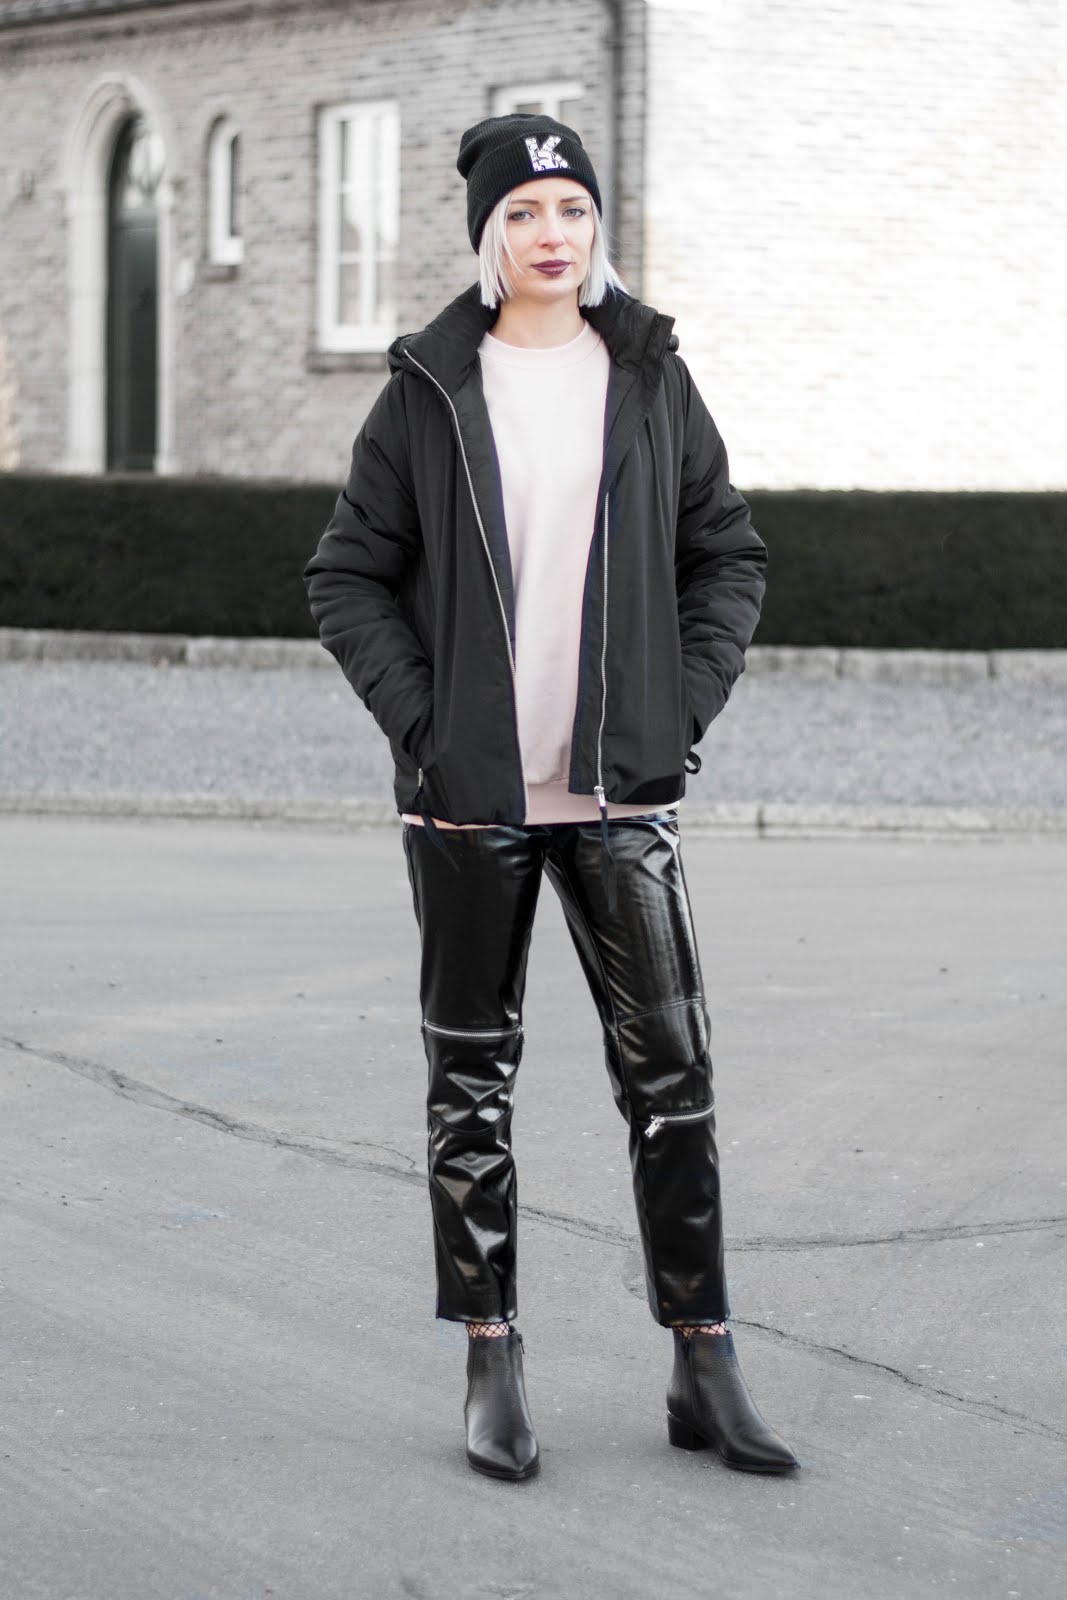 All black outfit, patent, zara, sacha boots, acne jensen inspired, karl lagerfeld hat, puffer jacket